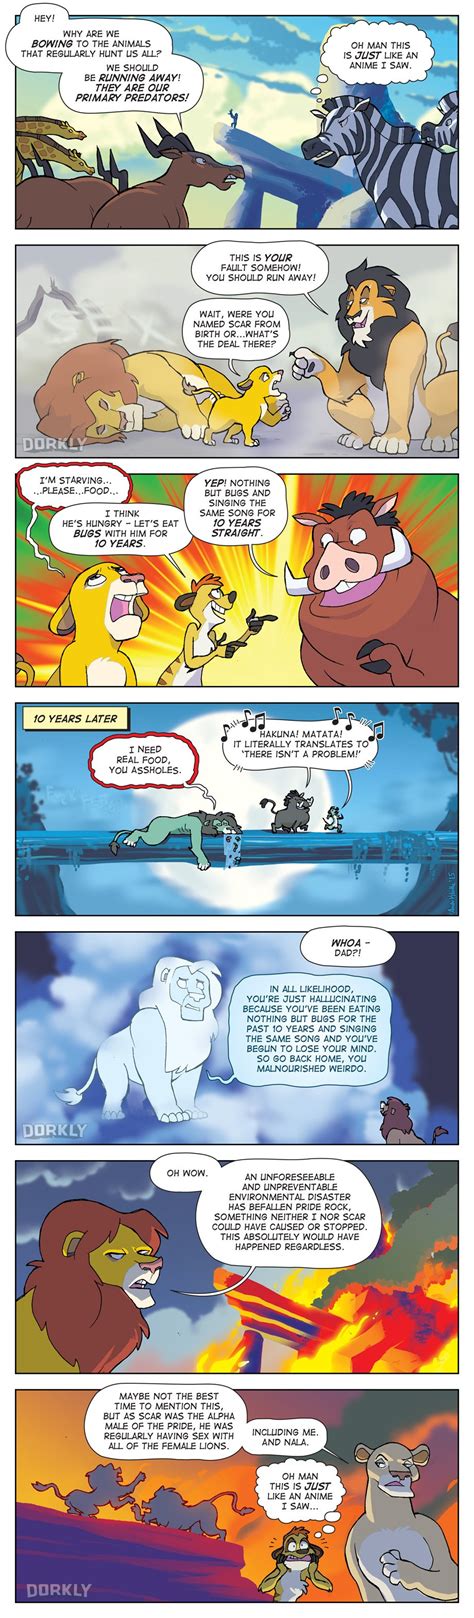 Lion King Pictures And Jokes Movies Funny Pictures